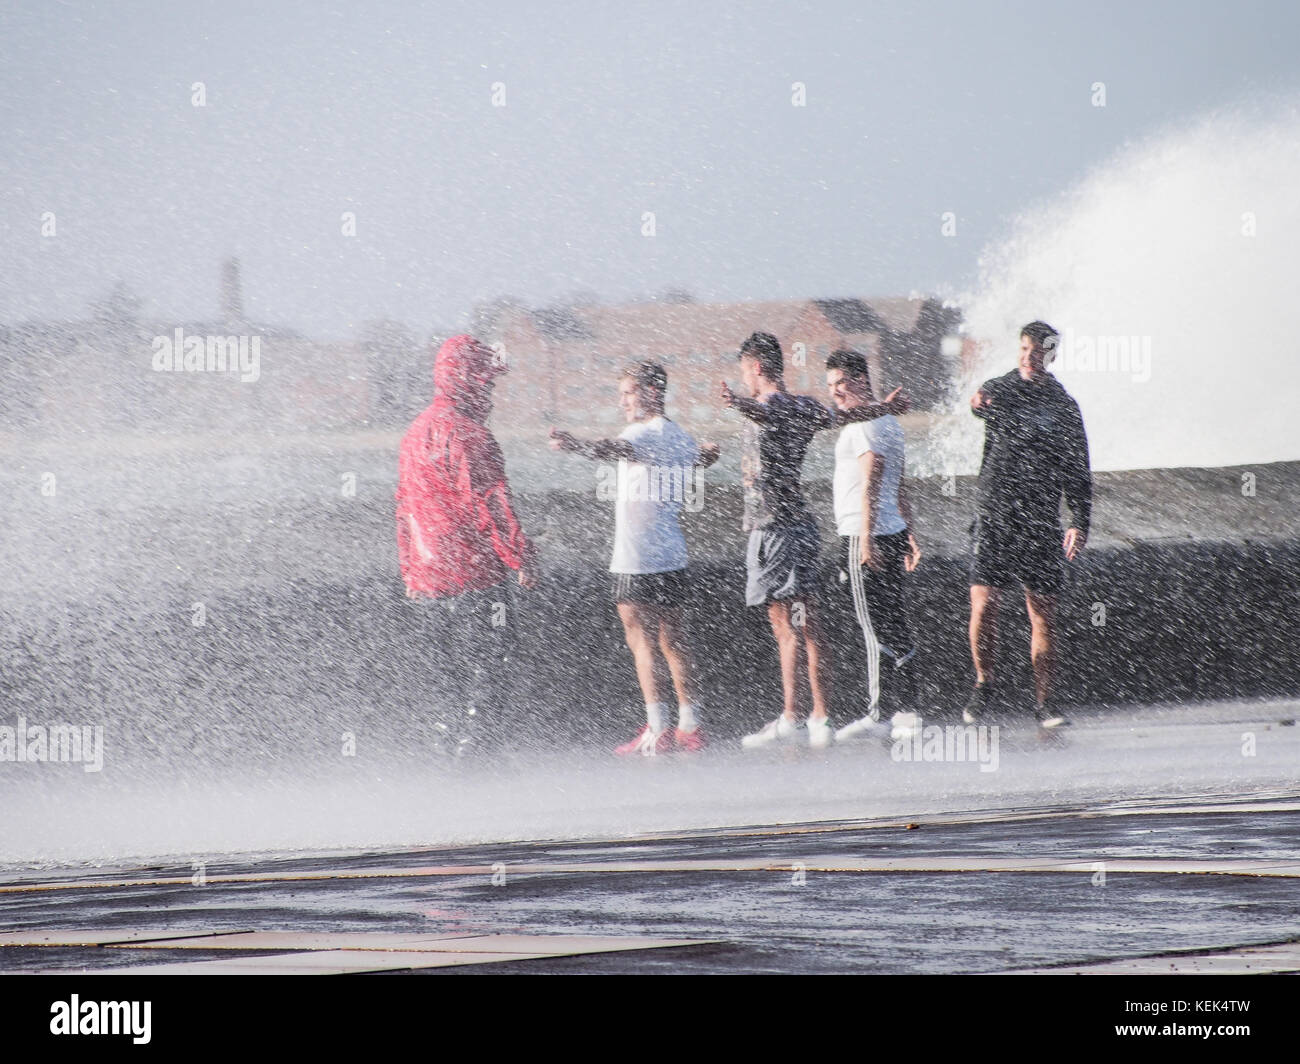 Southsea, Portsmouth, UK. 21st Oct, 2017. UK Weather. A group of teenagers make the most of the large waves breaking over the sea wall of Southsea seafront as Storm Brian hits the Southern coastline of the UK at high tide. Credit: simon evans/Alamy Live News Stock Photo